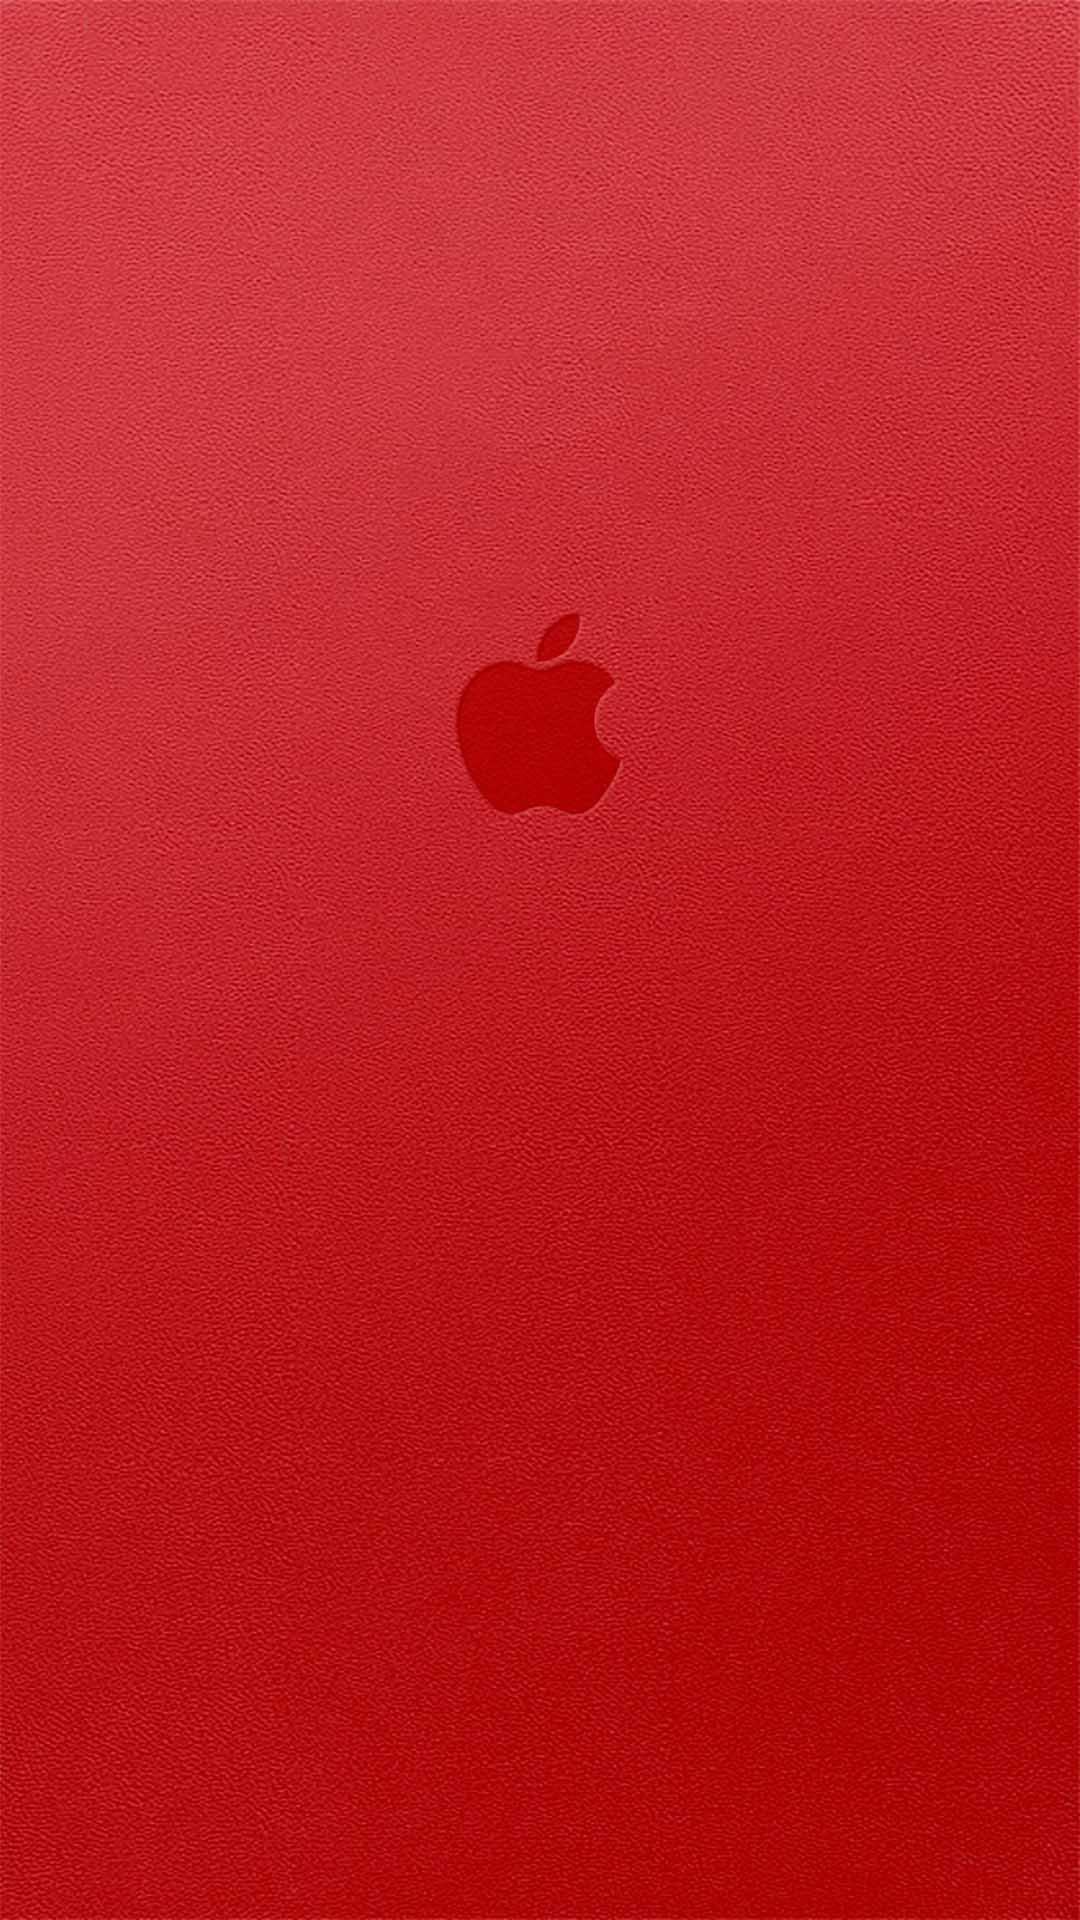 Iphone 7 Red Iphone 7 Wallpaper Apple